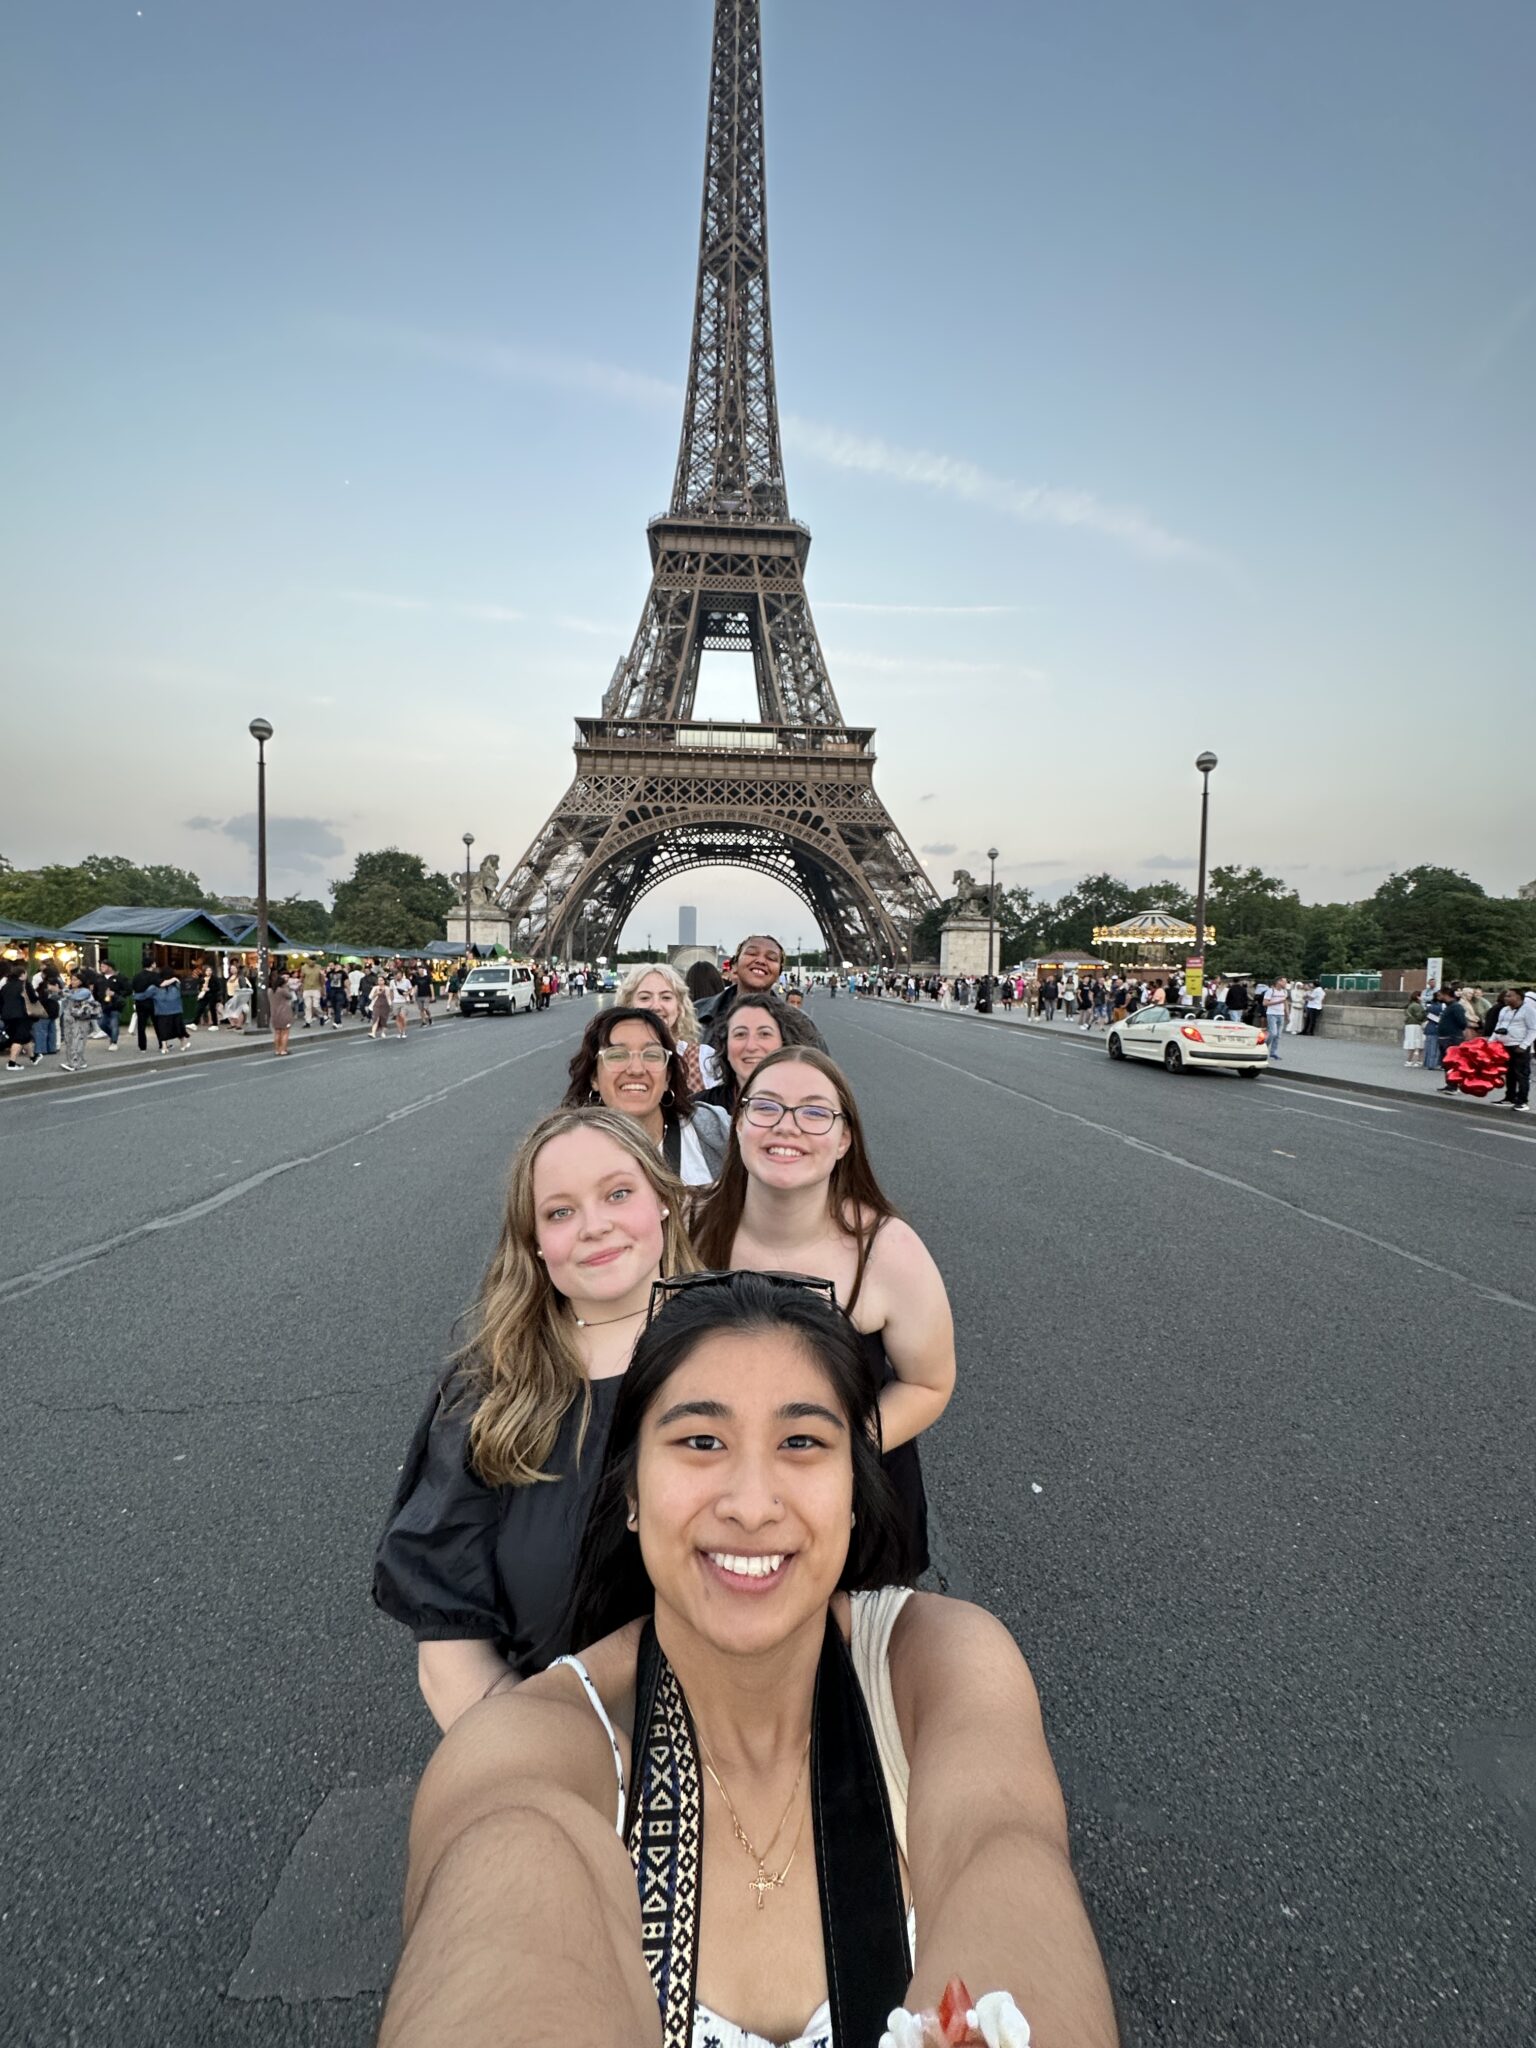 A group of students and their professor take a selfie in front of the Eiffel Tower in Paris France.